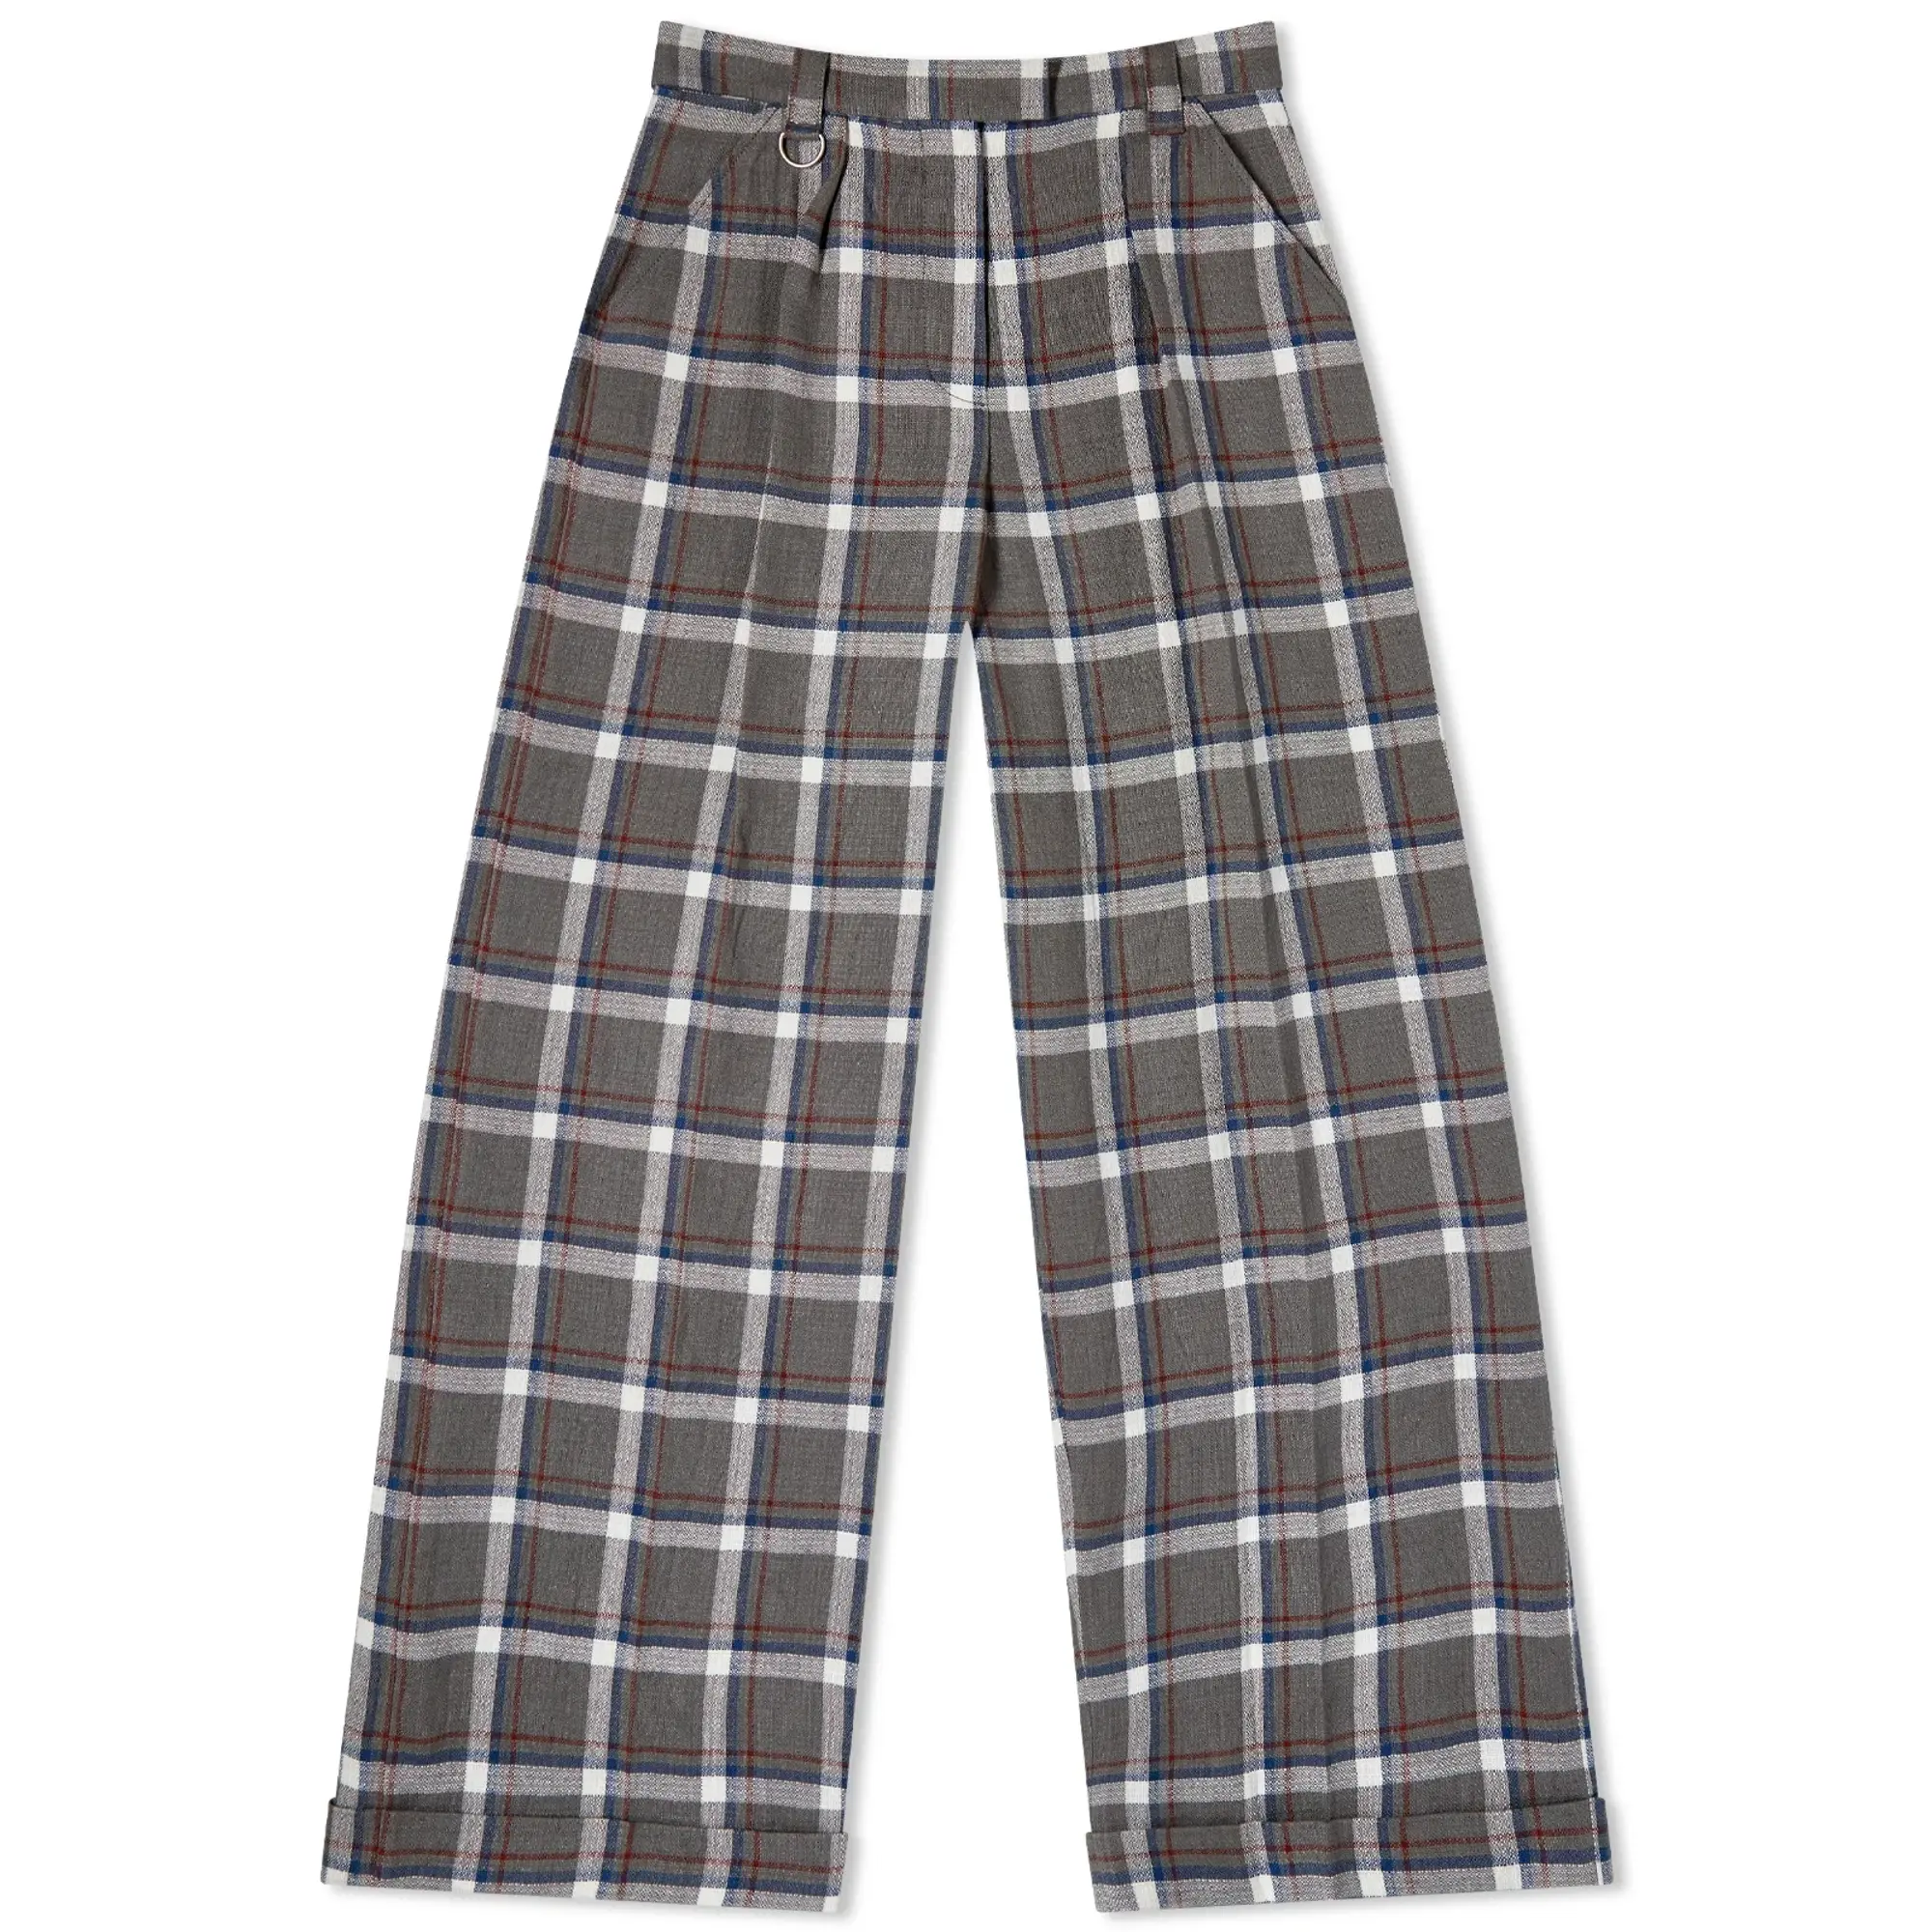 Kenzo Women's Tailored Wide Leg Checked Pant Misty Grey